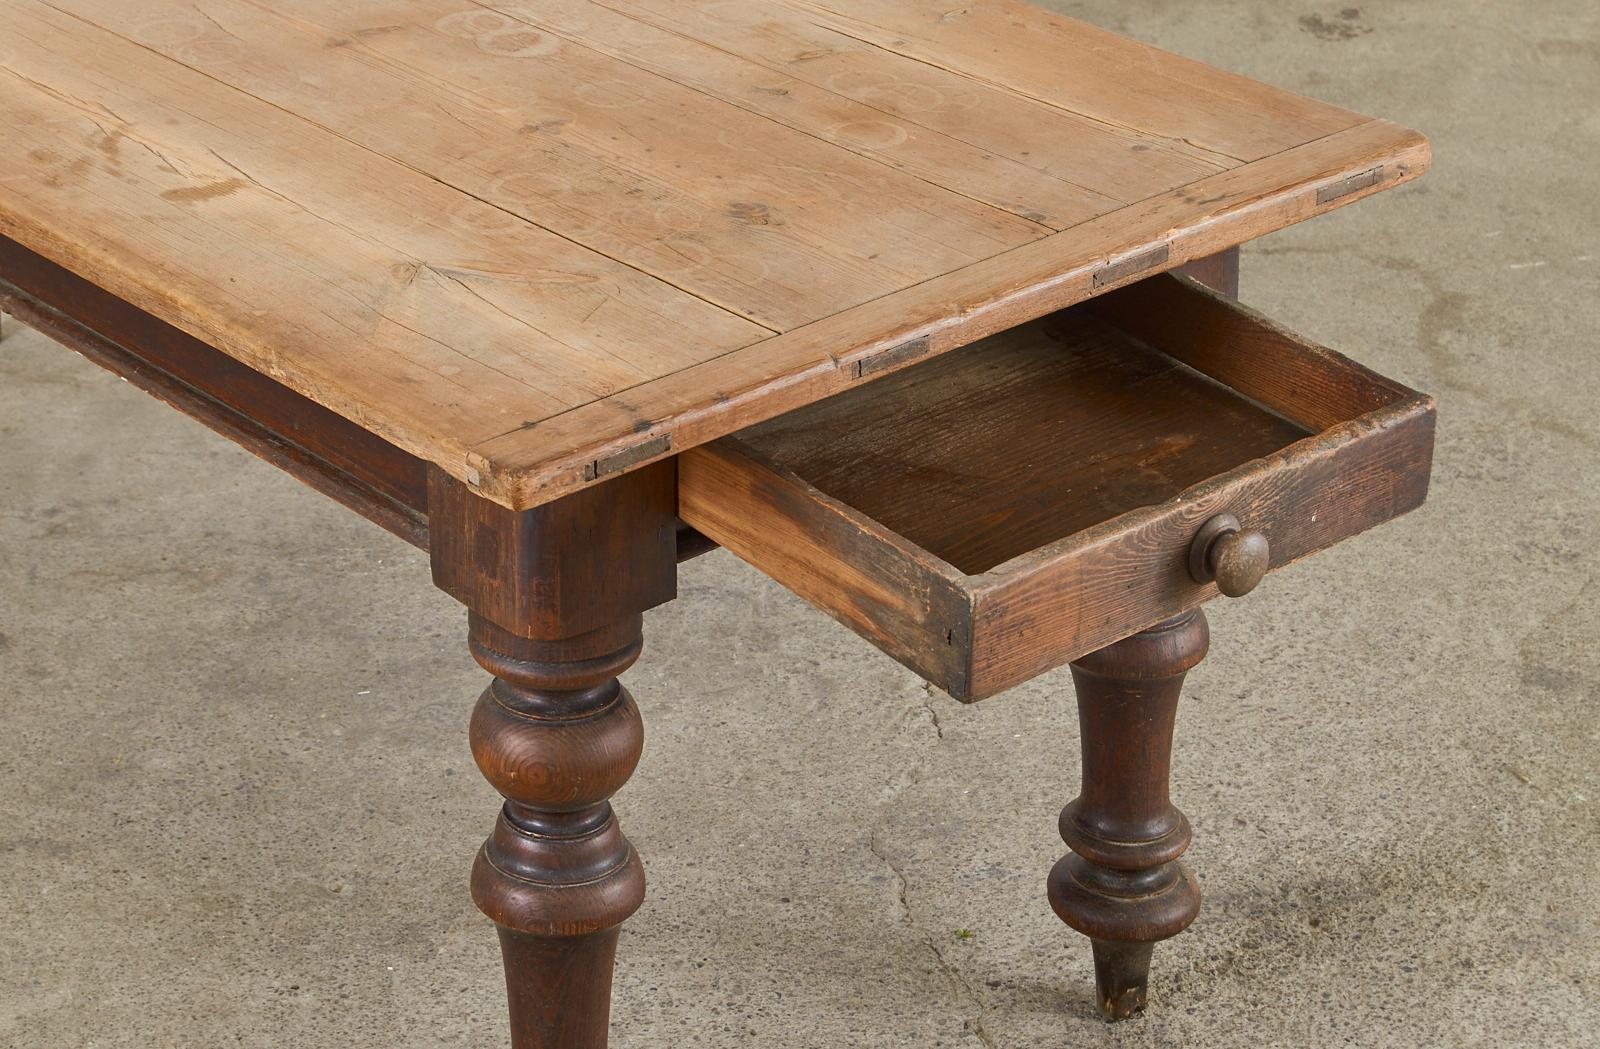 Hand-Crafted 19th Century Country English Provincial Pine Farmhouse Dining Table